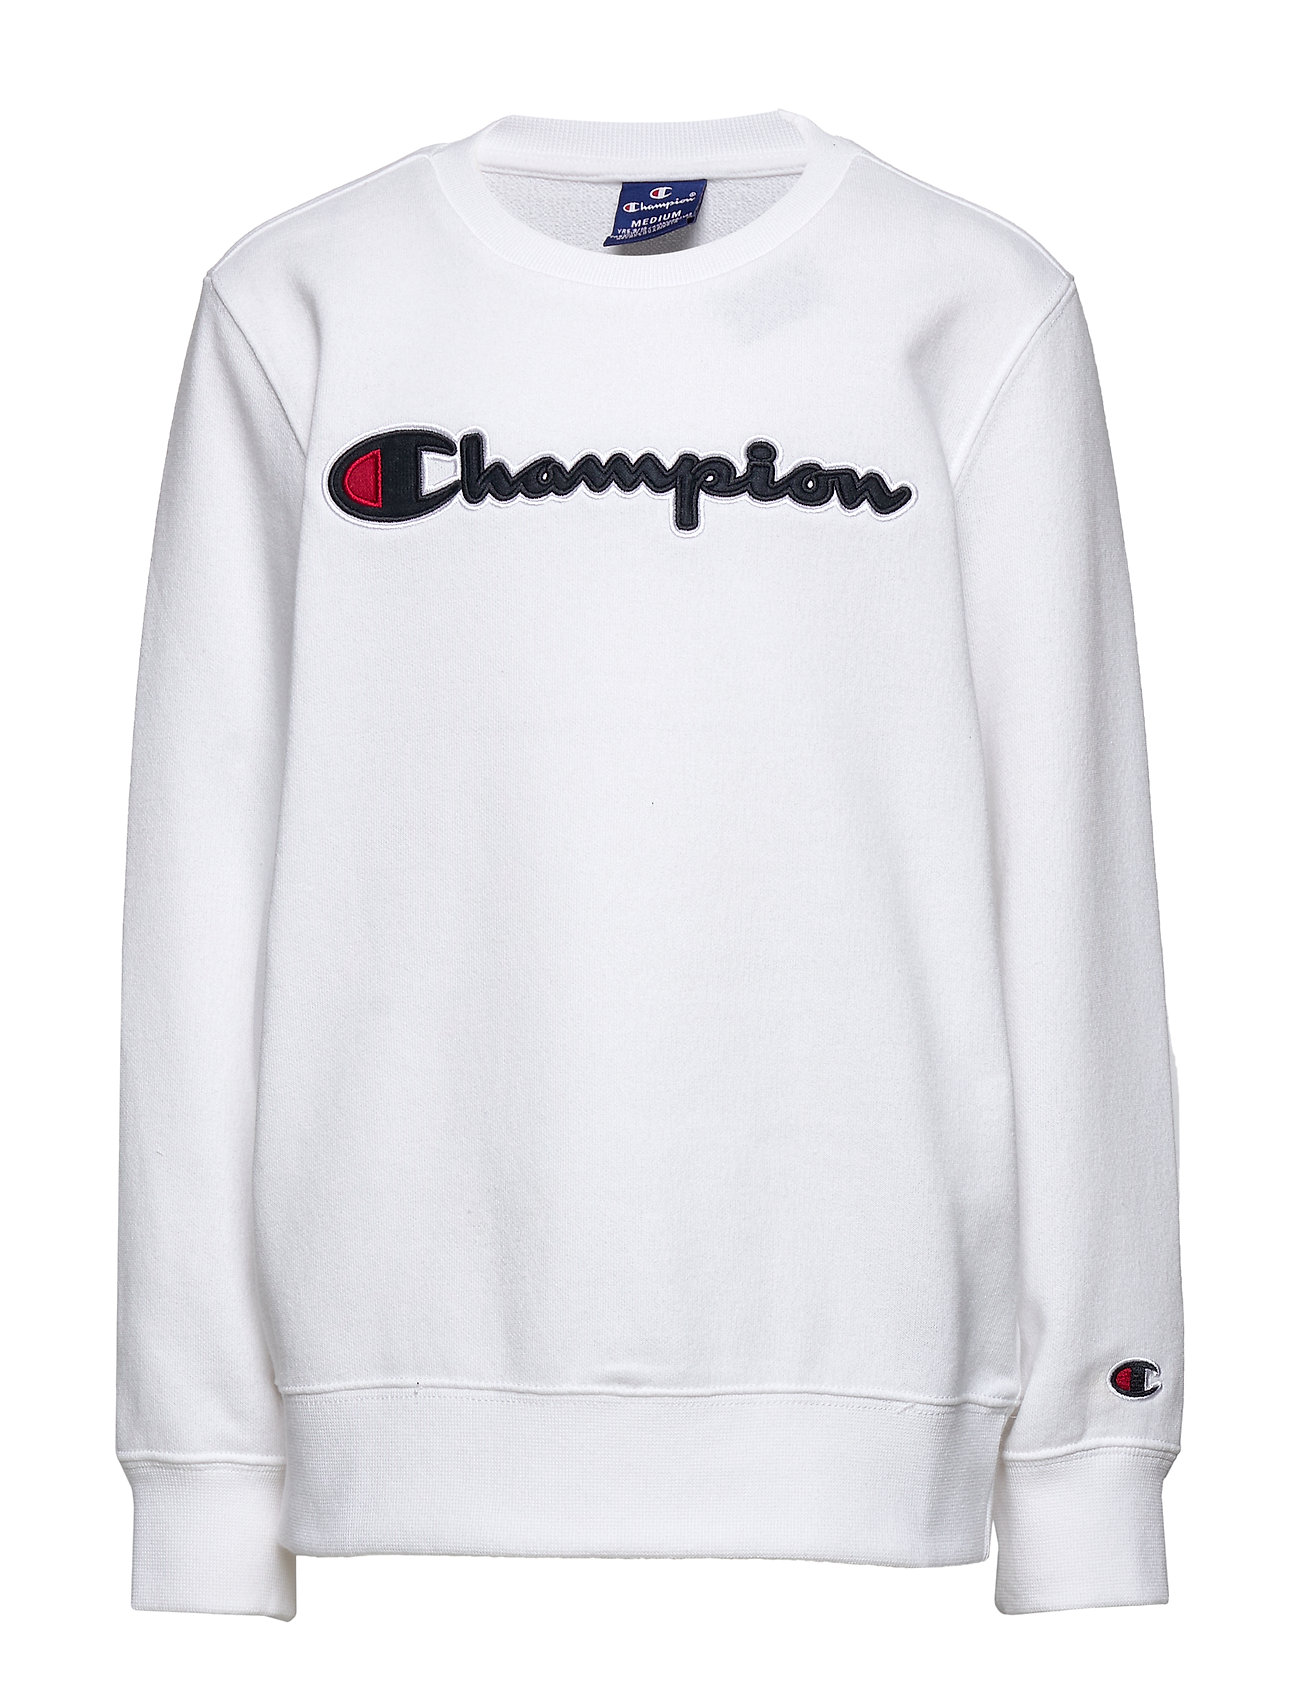 champions clothing outlet